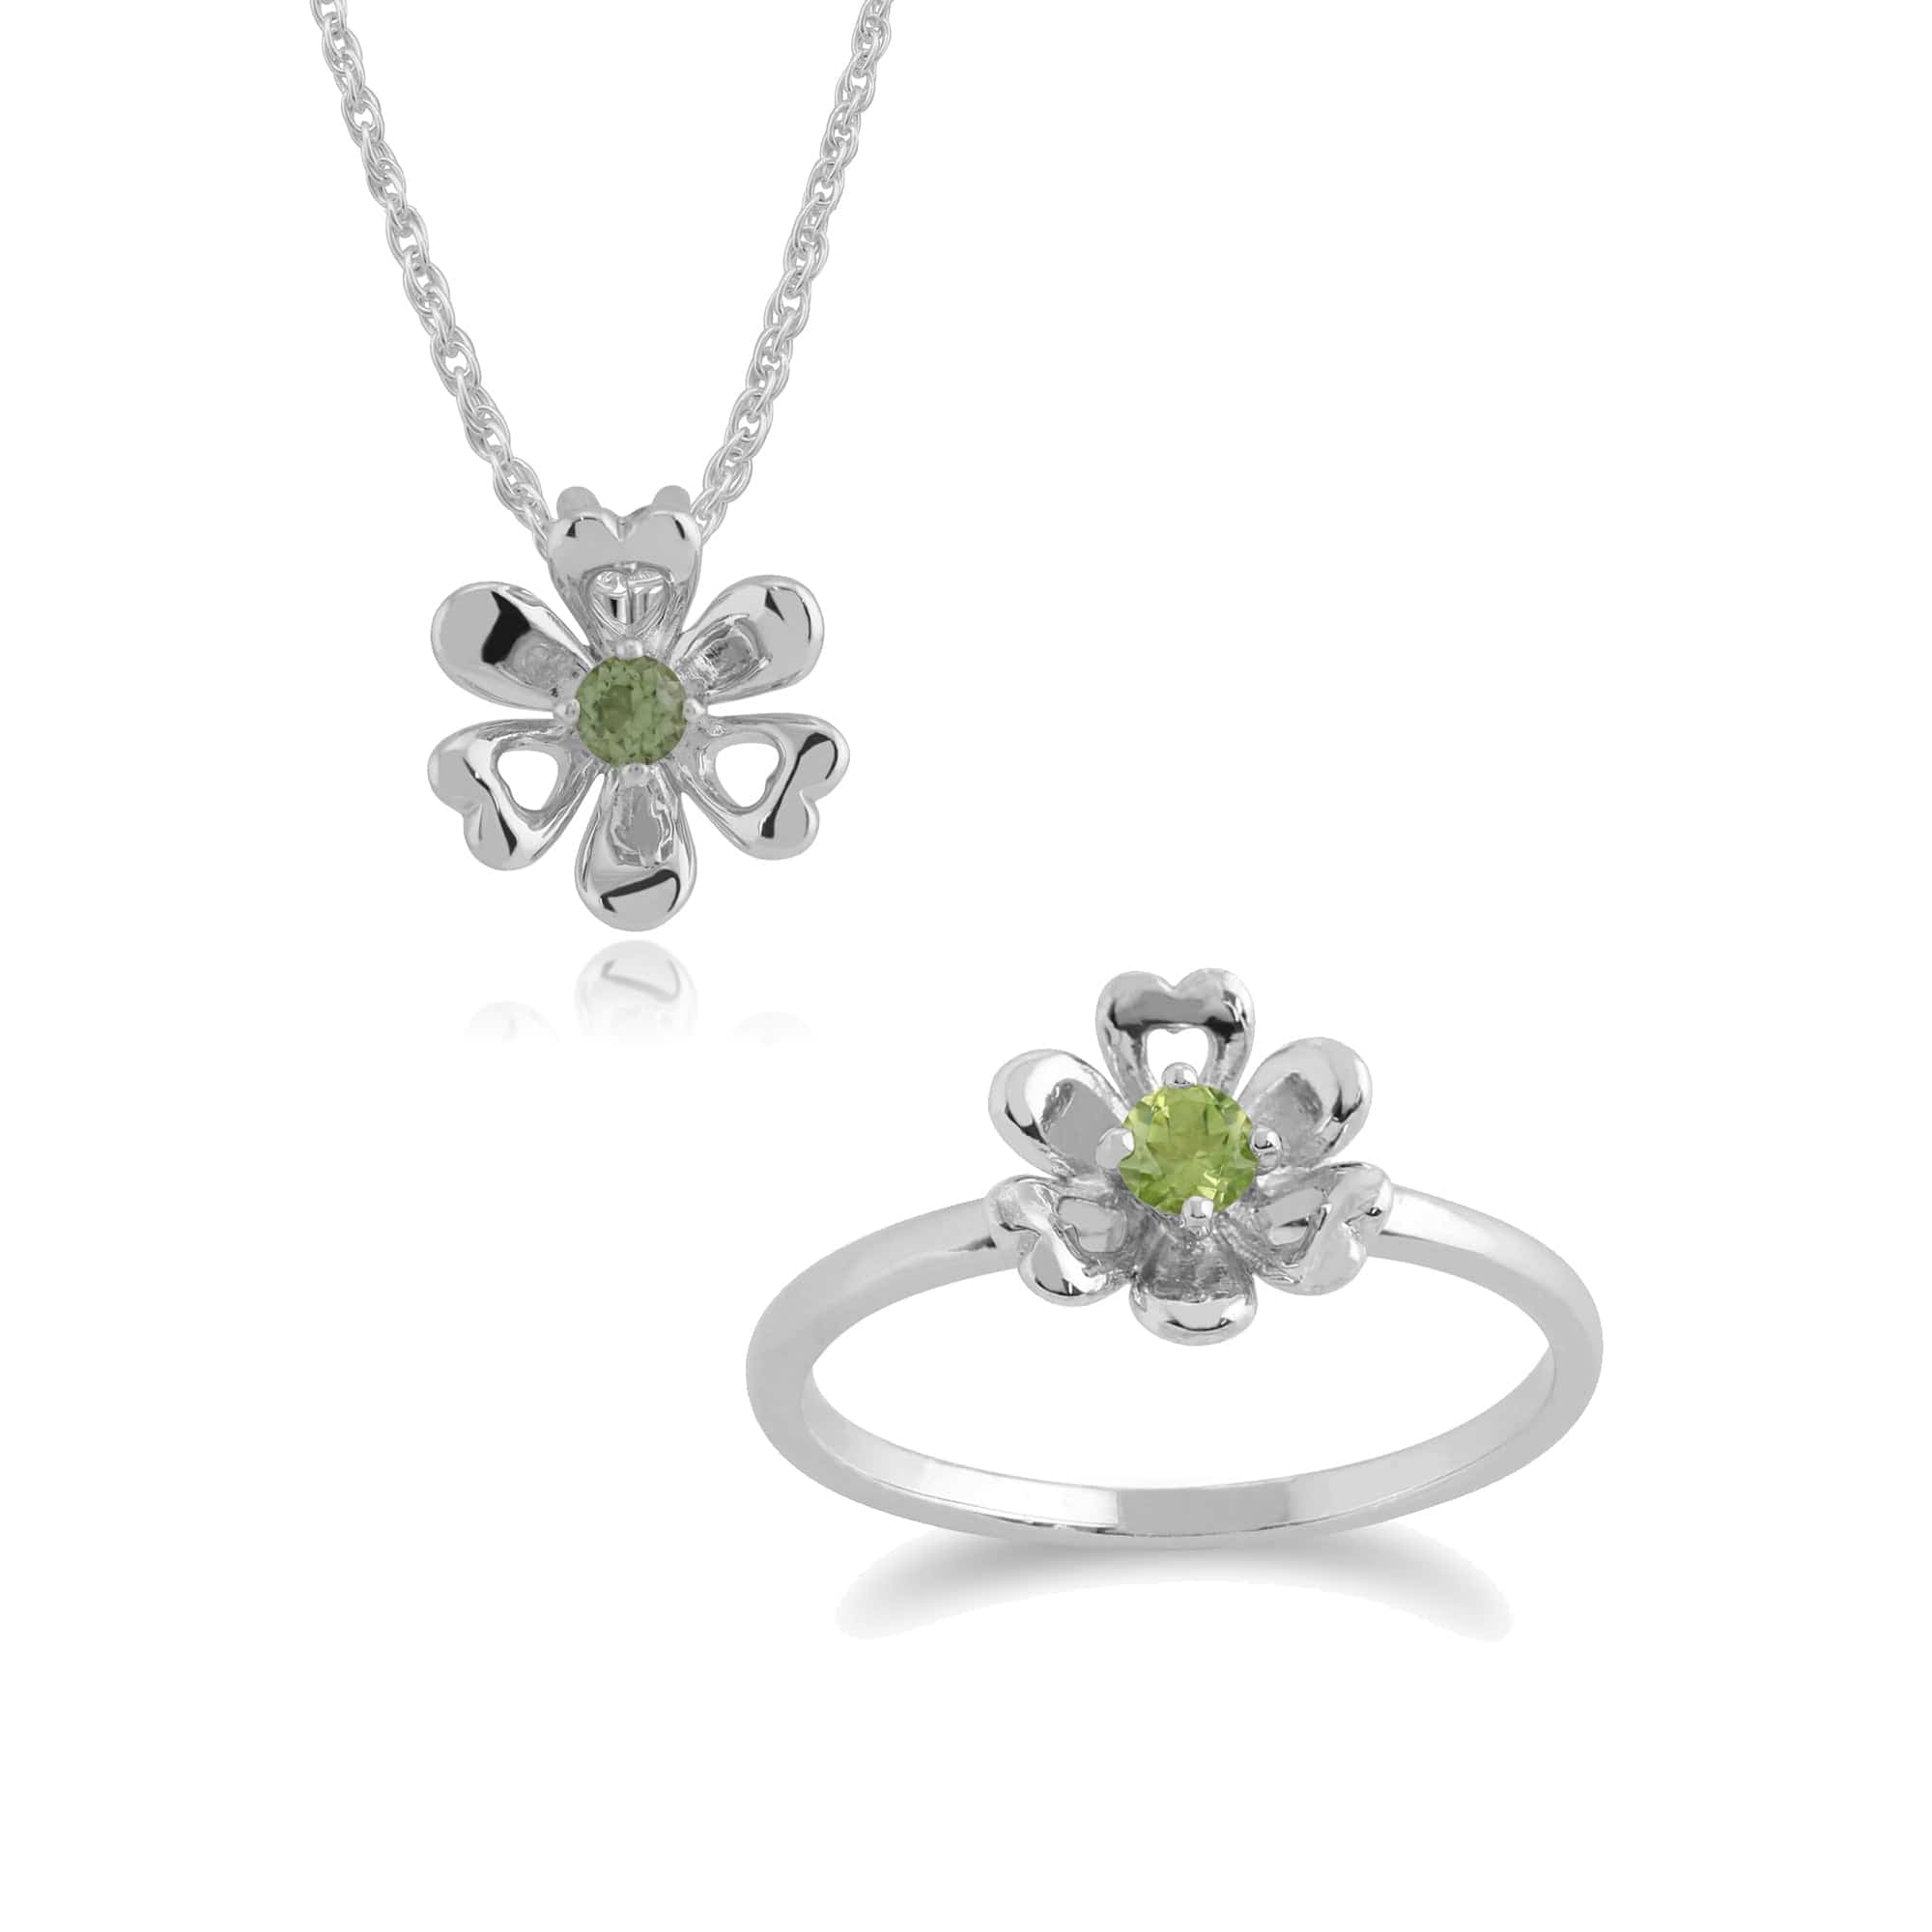 270P021901925-270R048401925 Floral Round Peridot Daisy Flower Pendant & Ring Set in 925 Sterling Silver 1